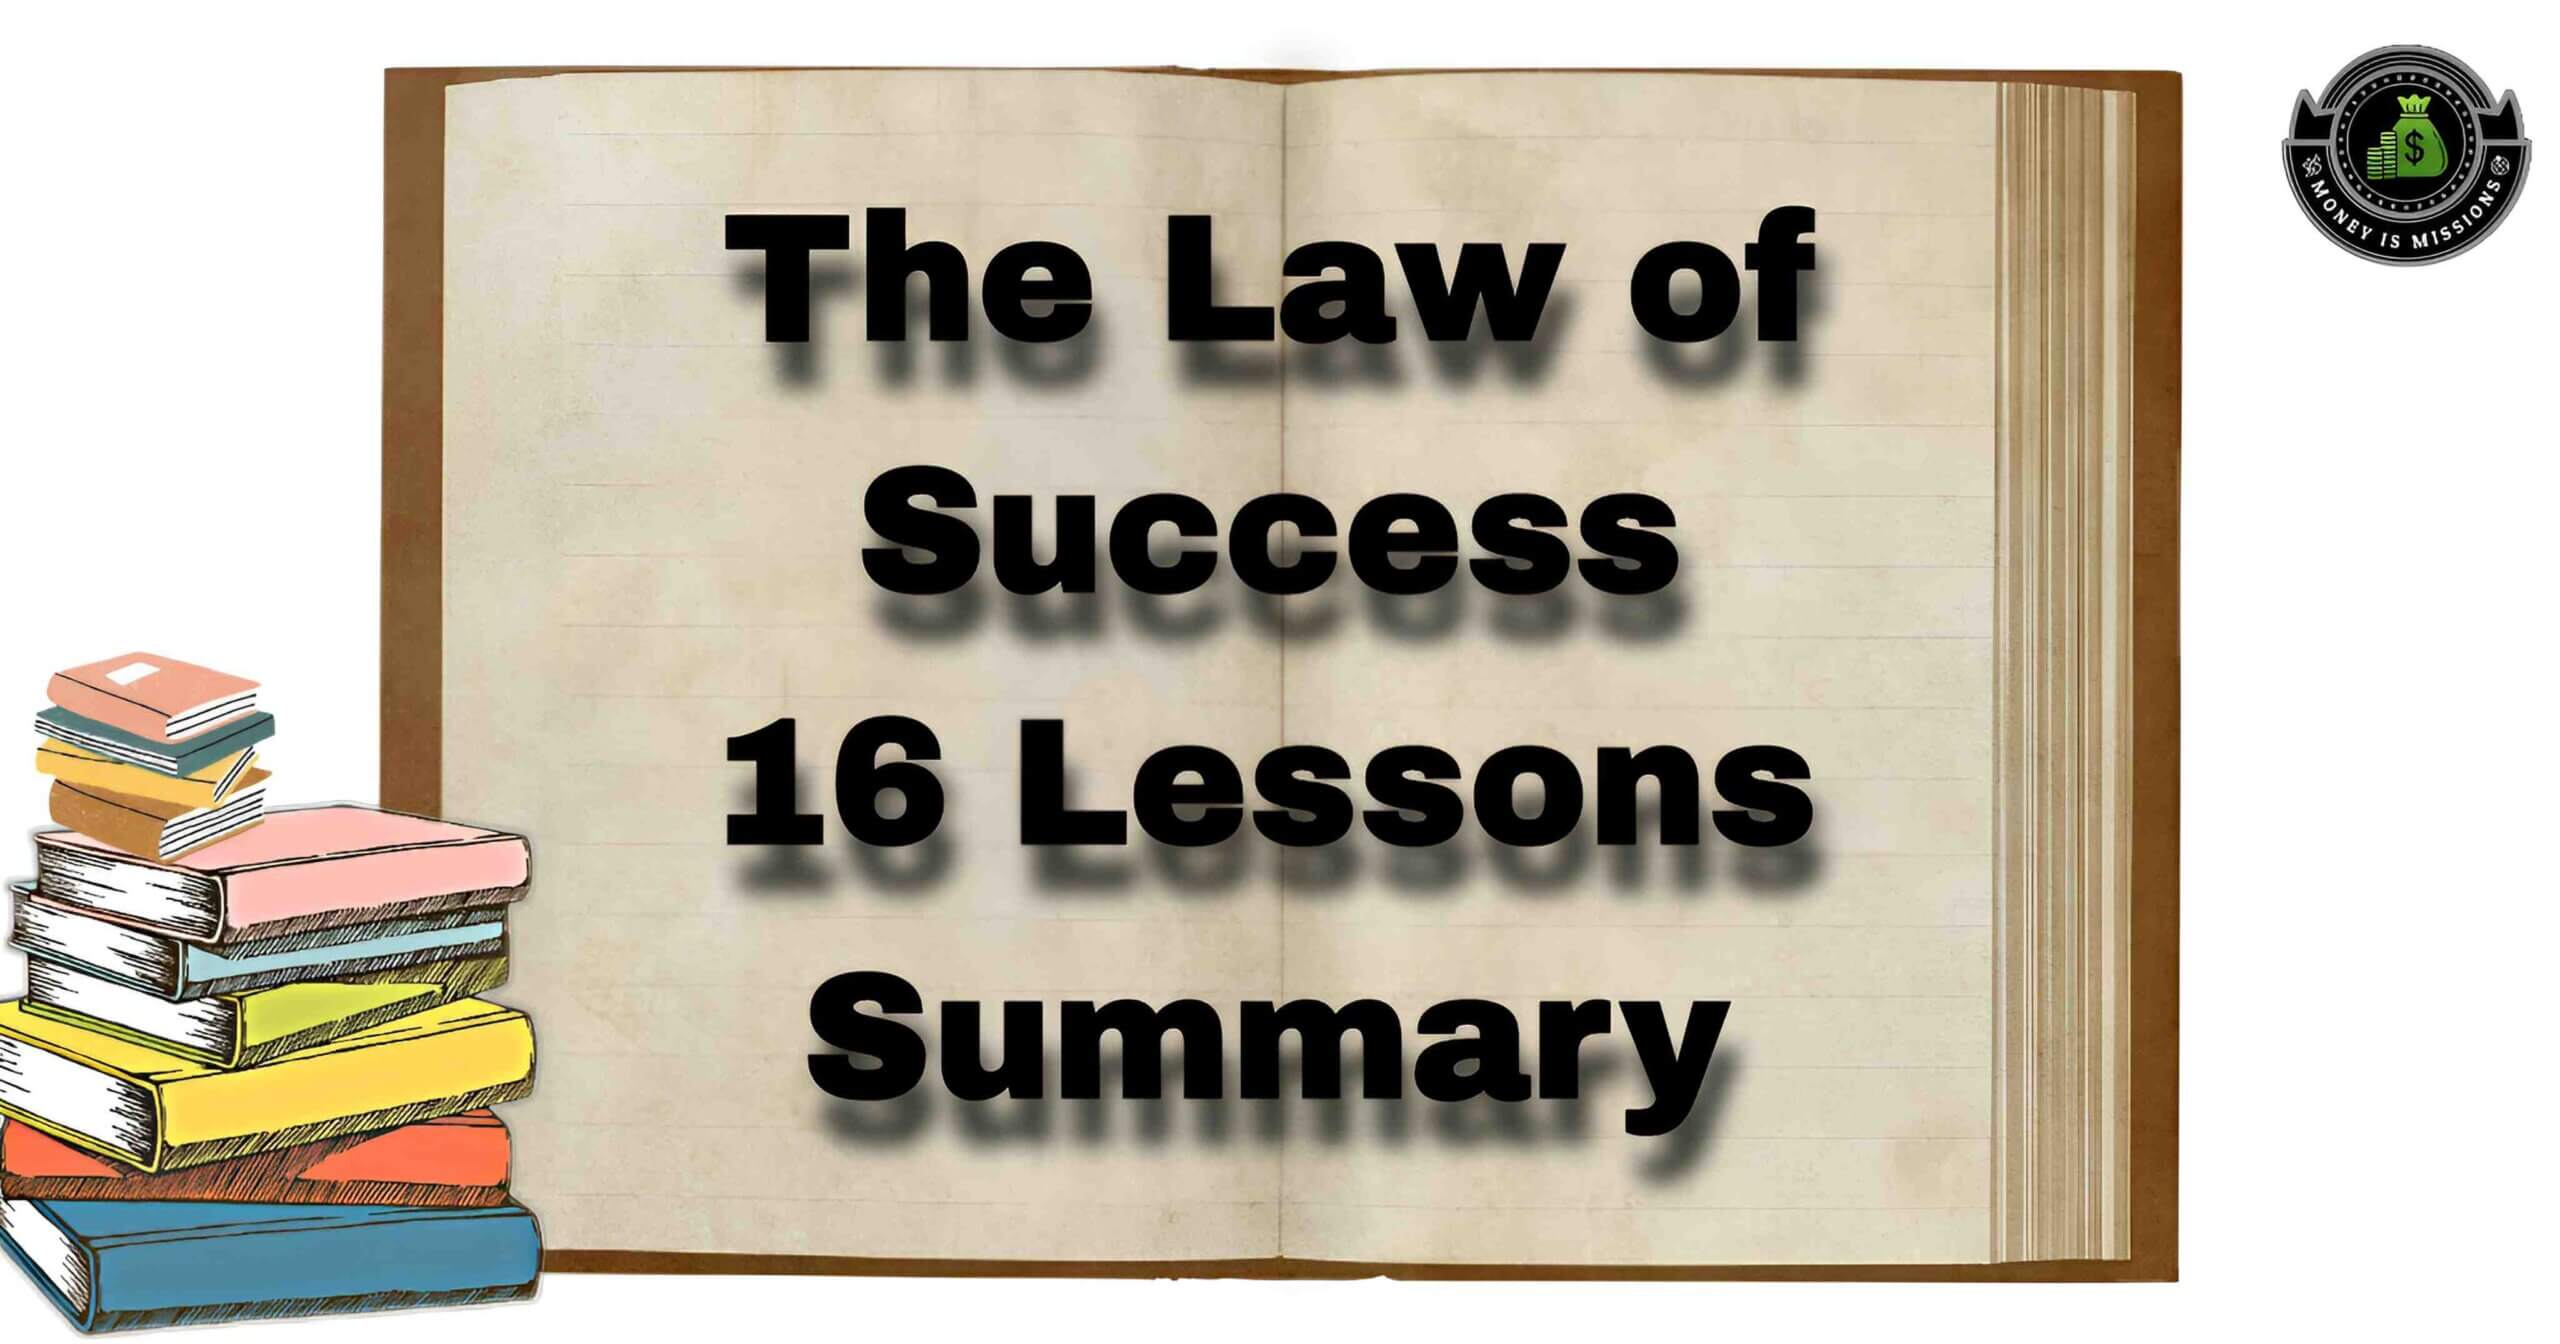 The Law of Success 16 Lessons Summary in Marathi – यशाचा नियम